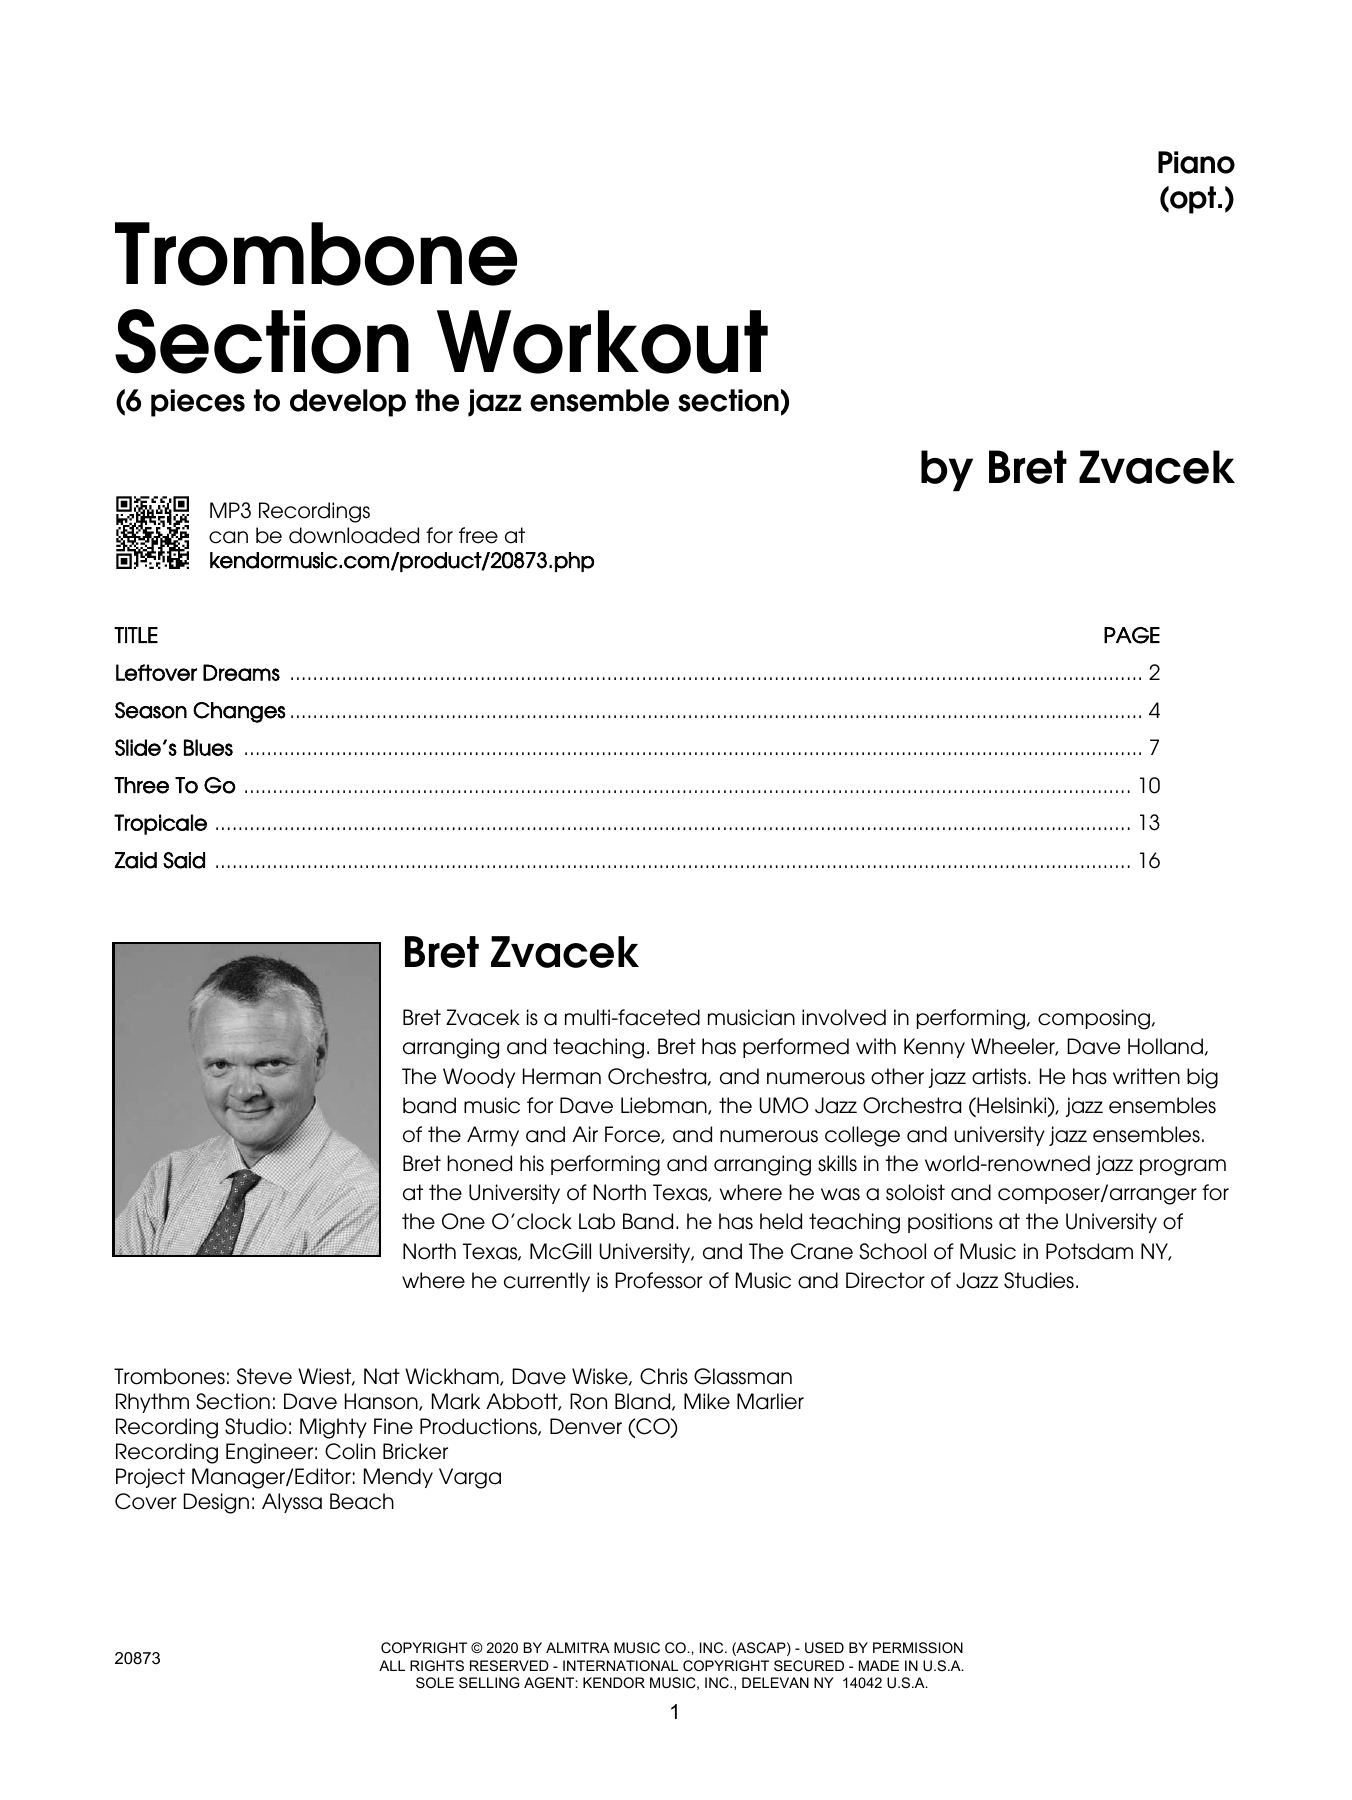 Trombone Section Workout with MP3's (6 pieces to develop the jazz ensemble section) - Piano (Brass Ensemble) von Bret Zvacek